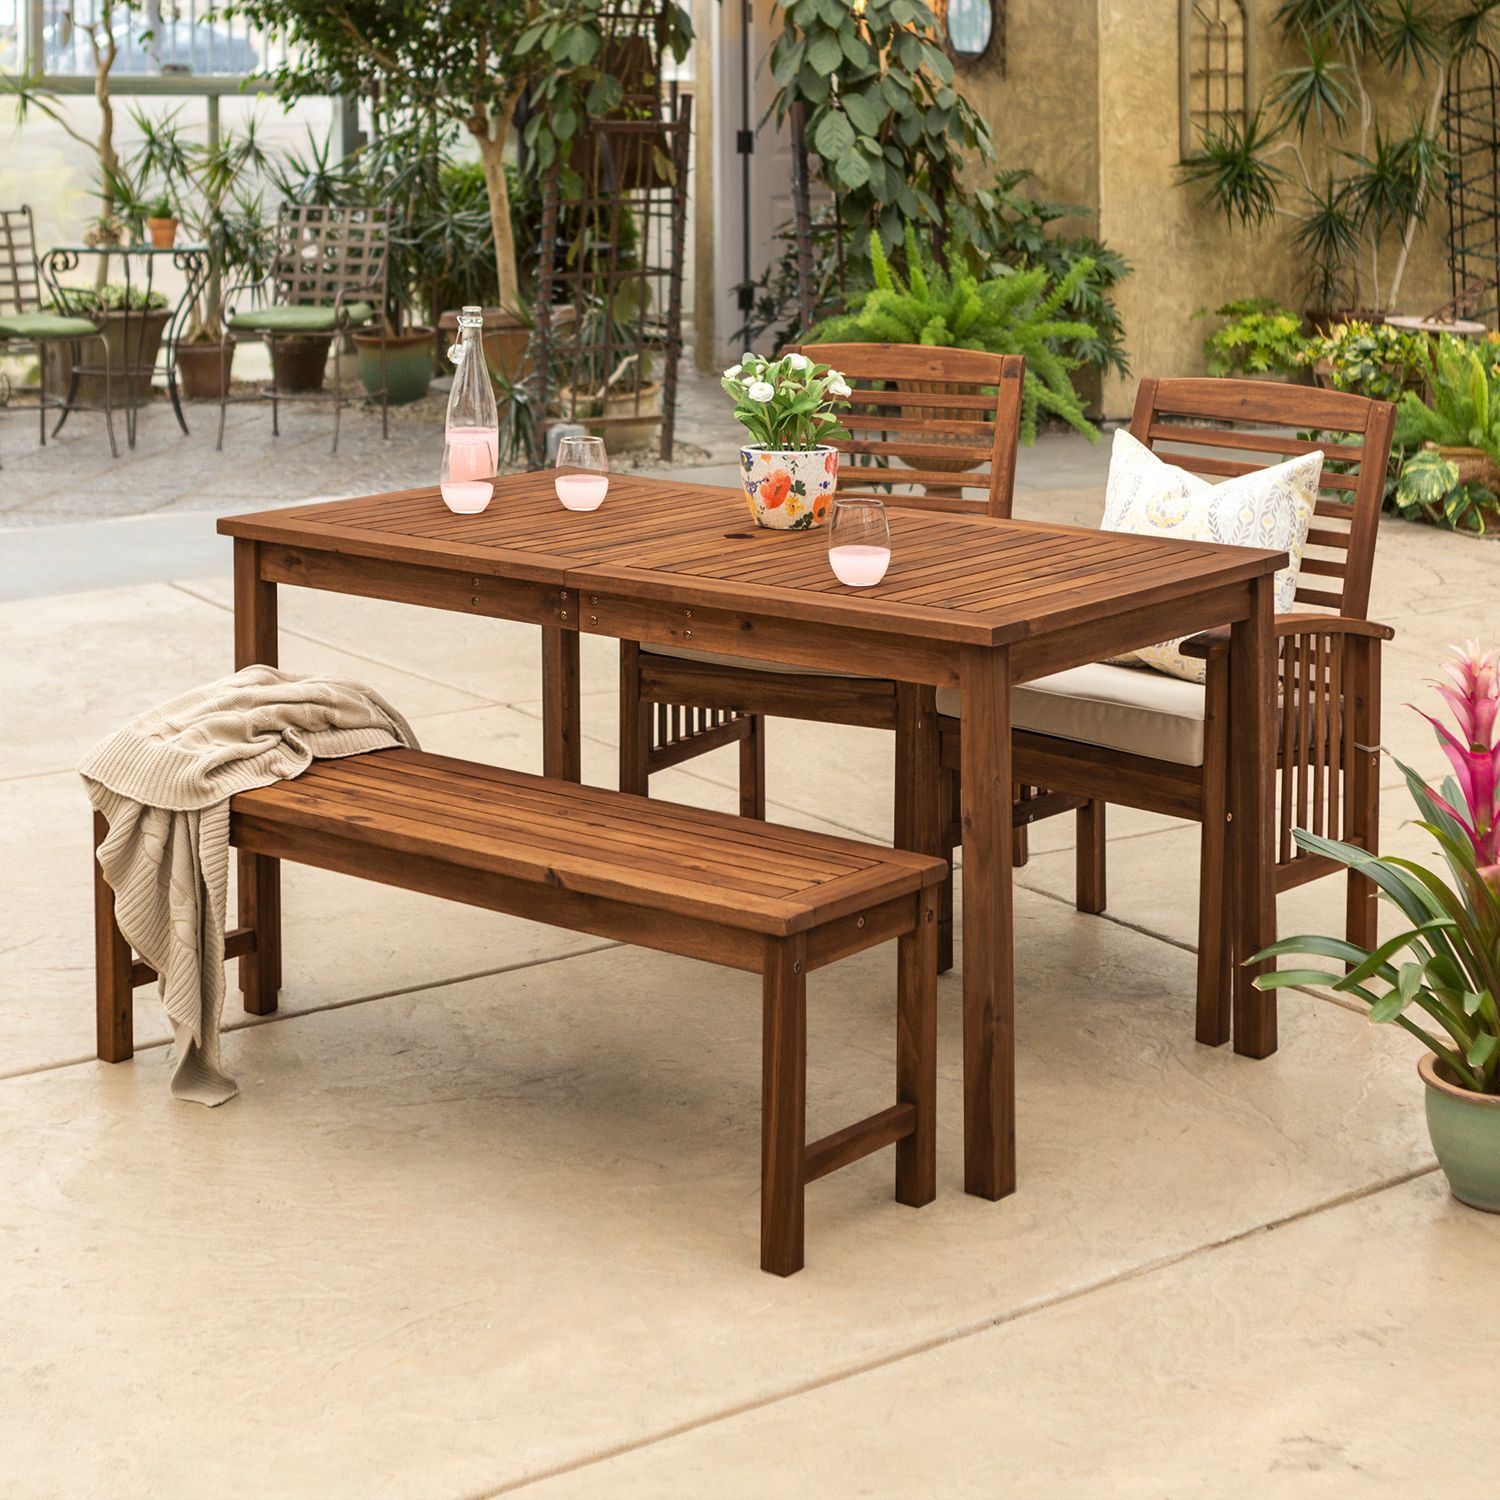 Classic Dark Brown Acacia Wood 4 Piece Patio Dining | Outdoor Dining Intended For Brown Acacia Patio Dining Sets (View 4 of 15)